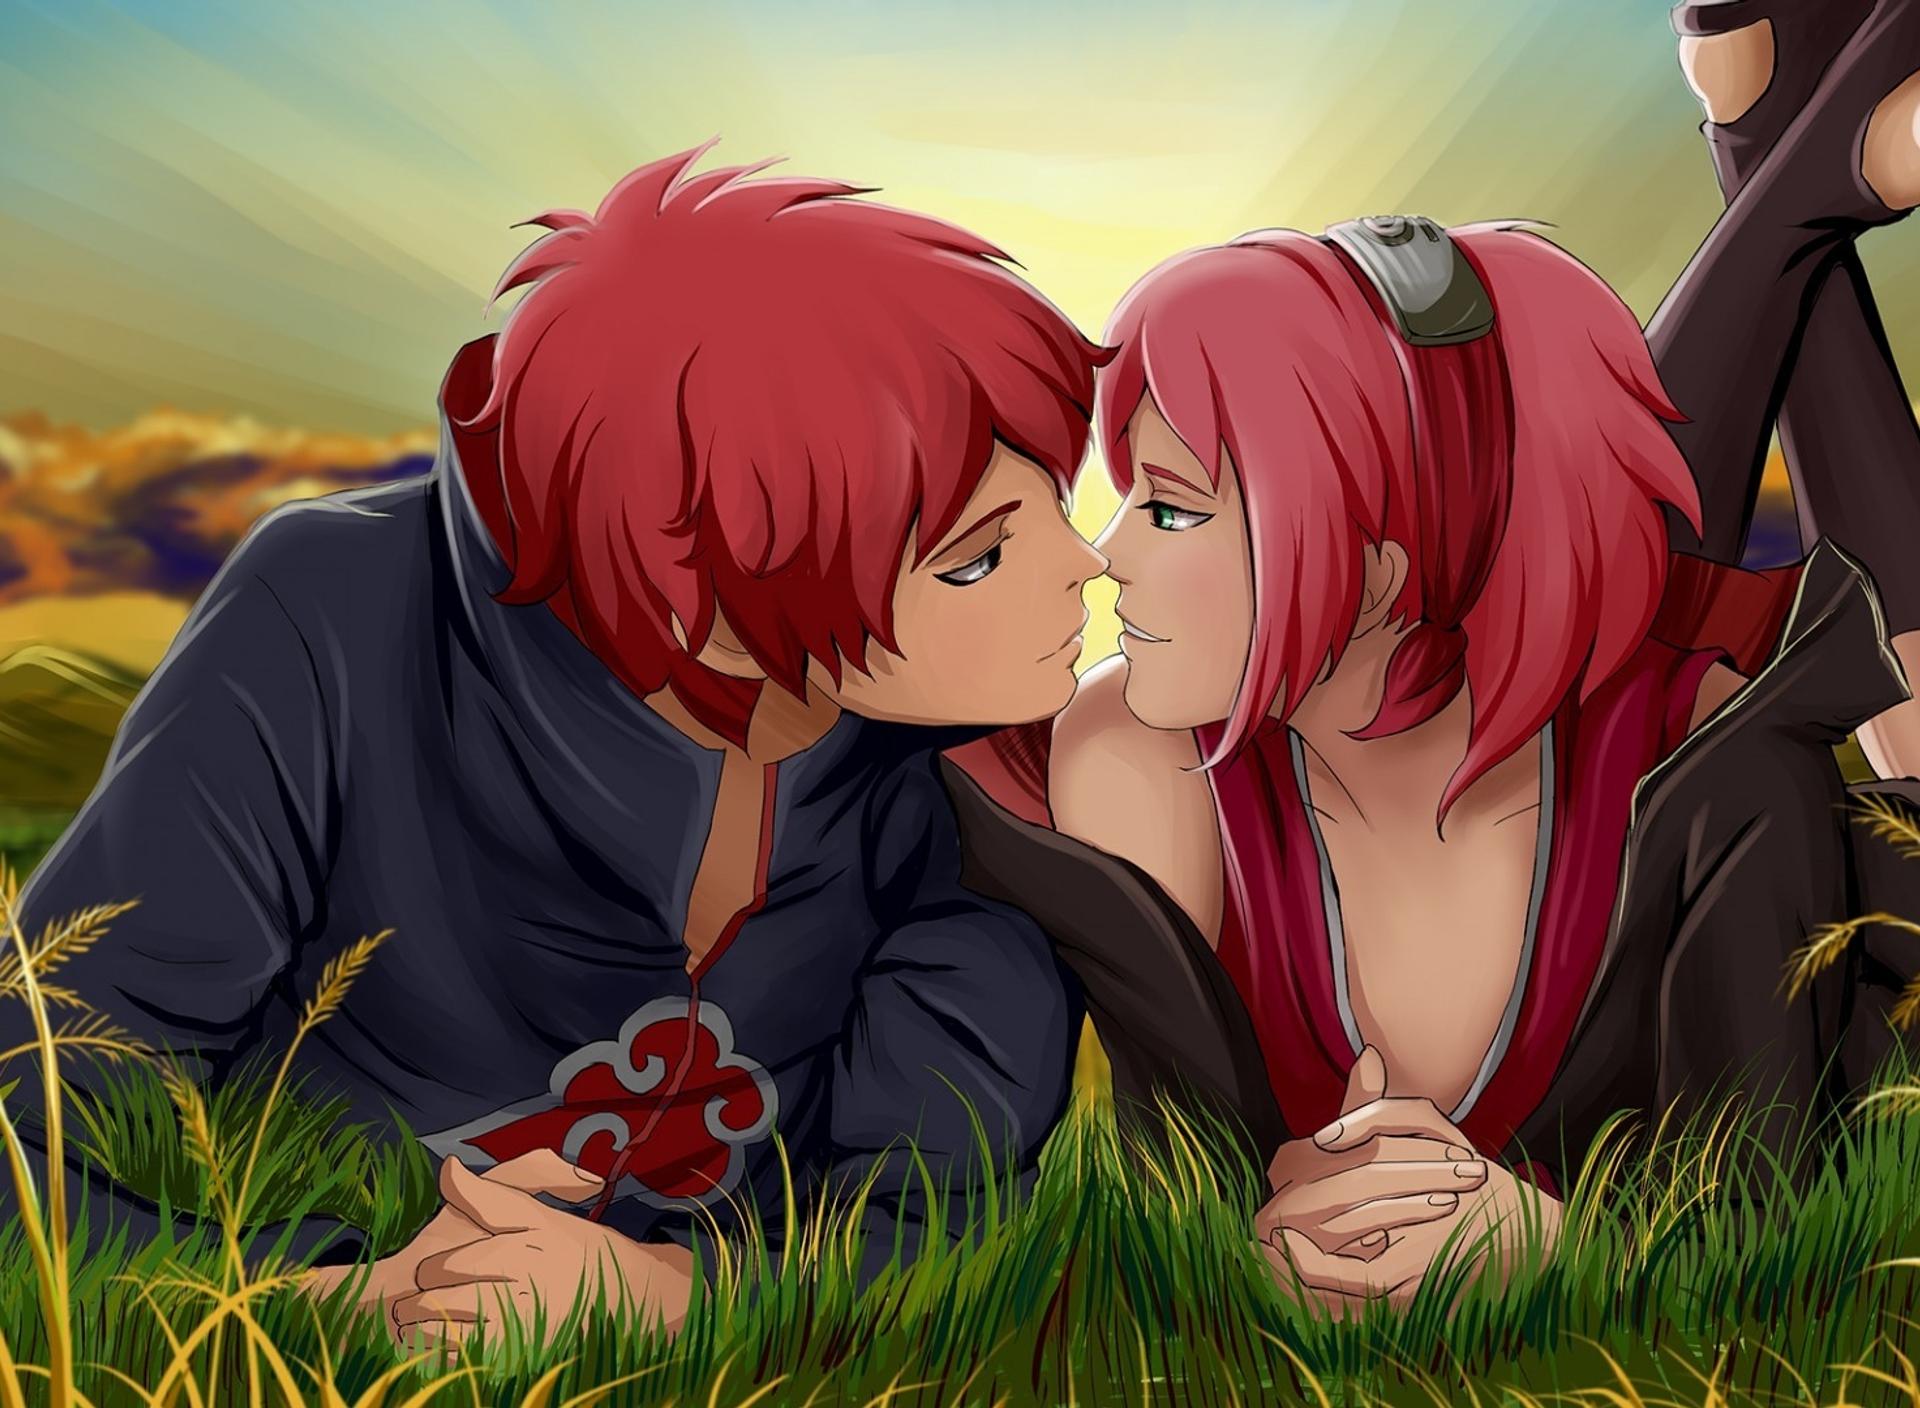 An anime couple with red hair kissing in the grass